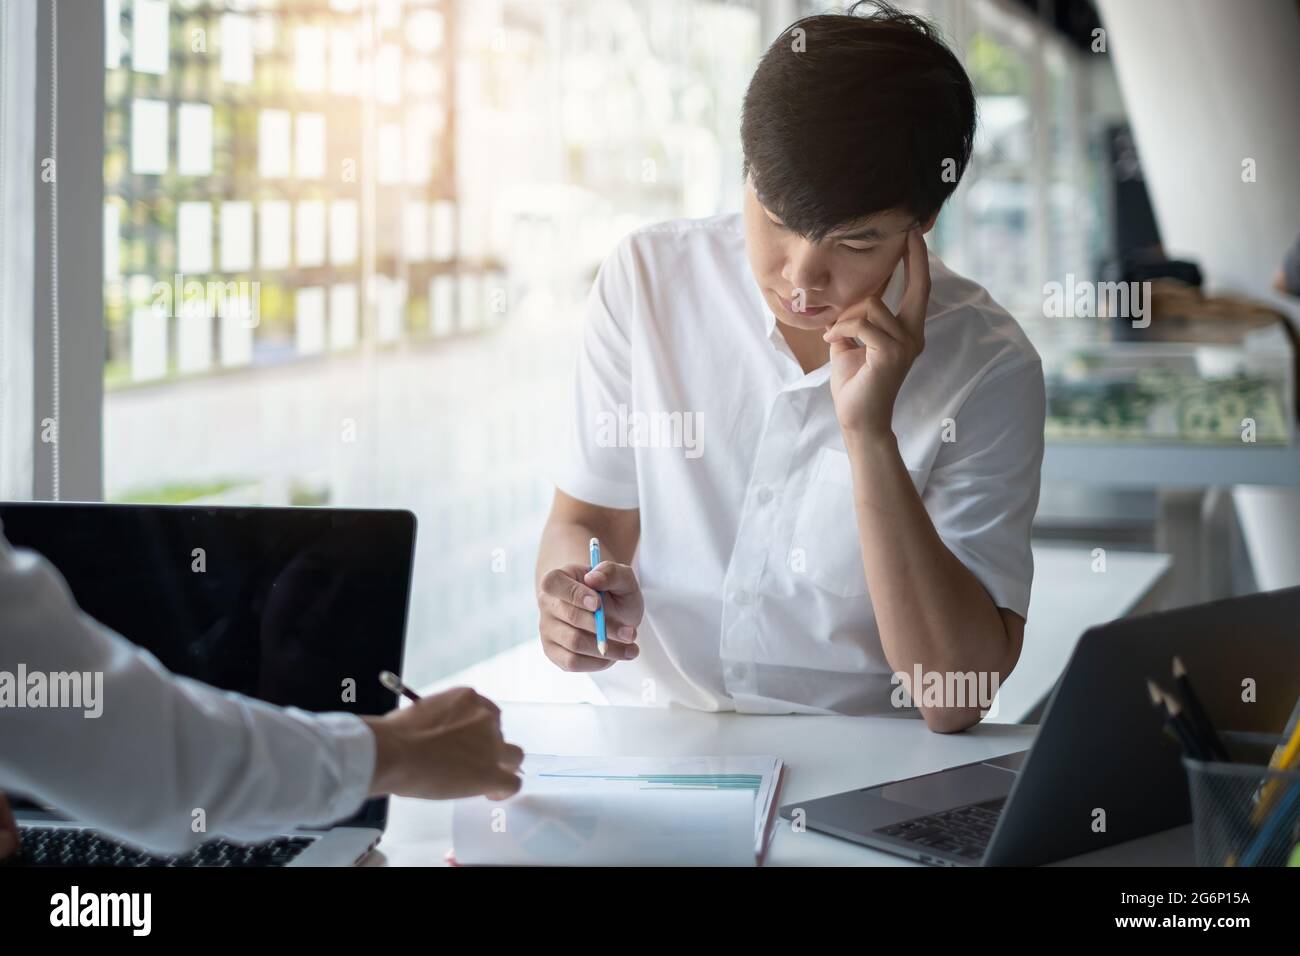 Finance and Accounting concept. Accountant team or Business team do paperwork during meeting in office. Stock Photo